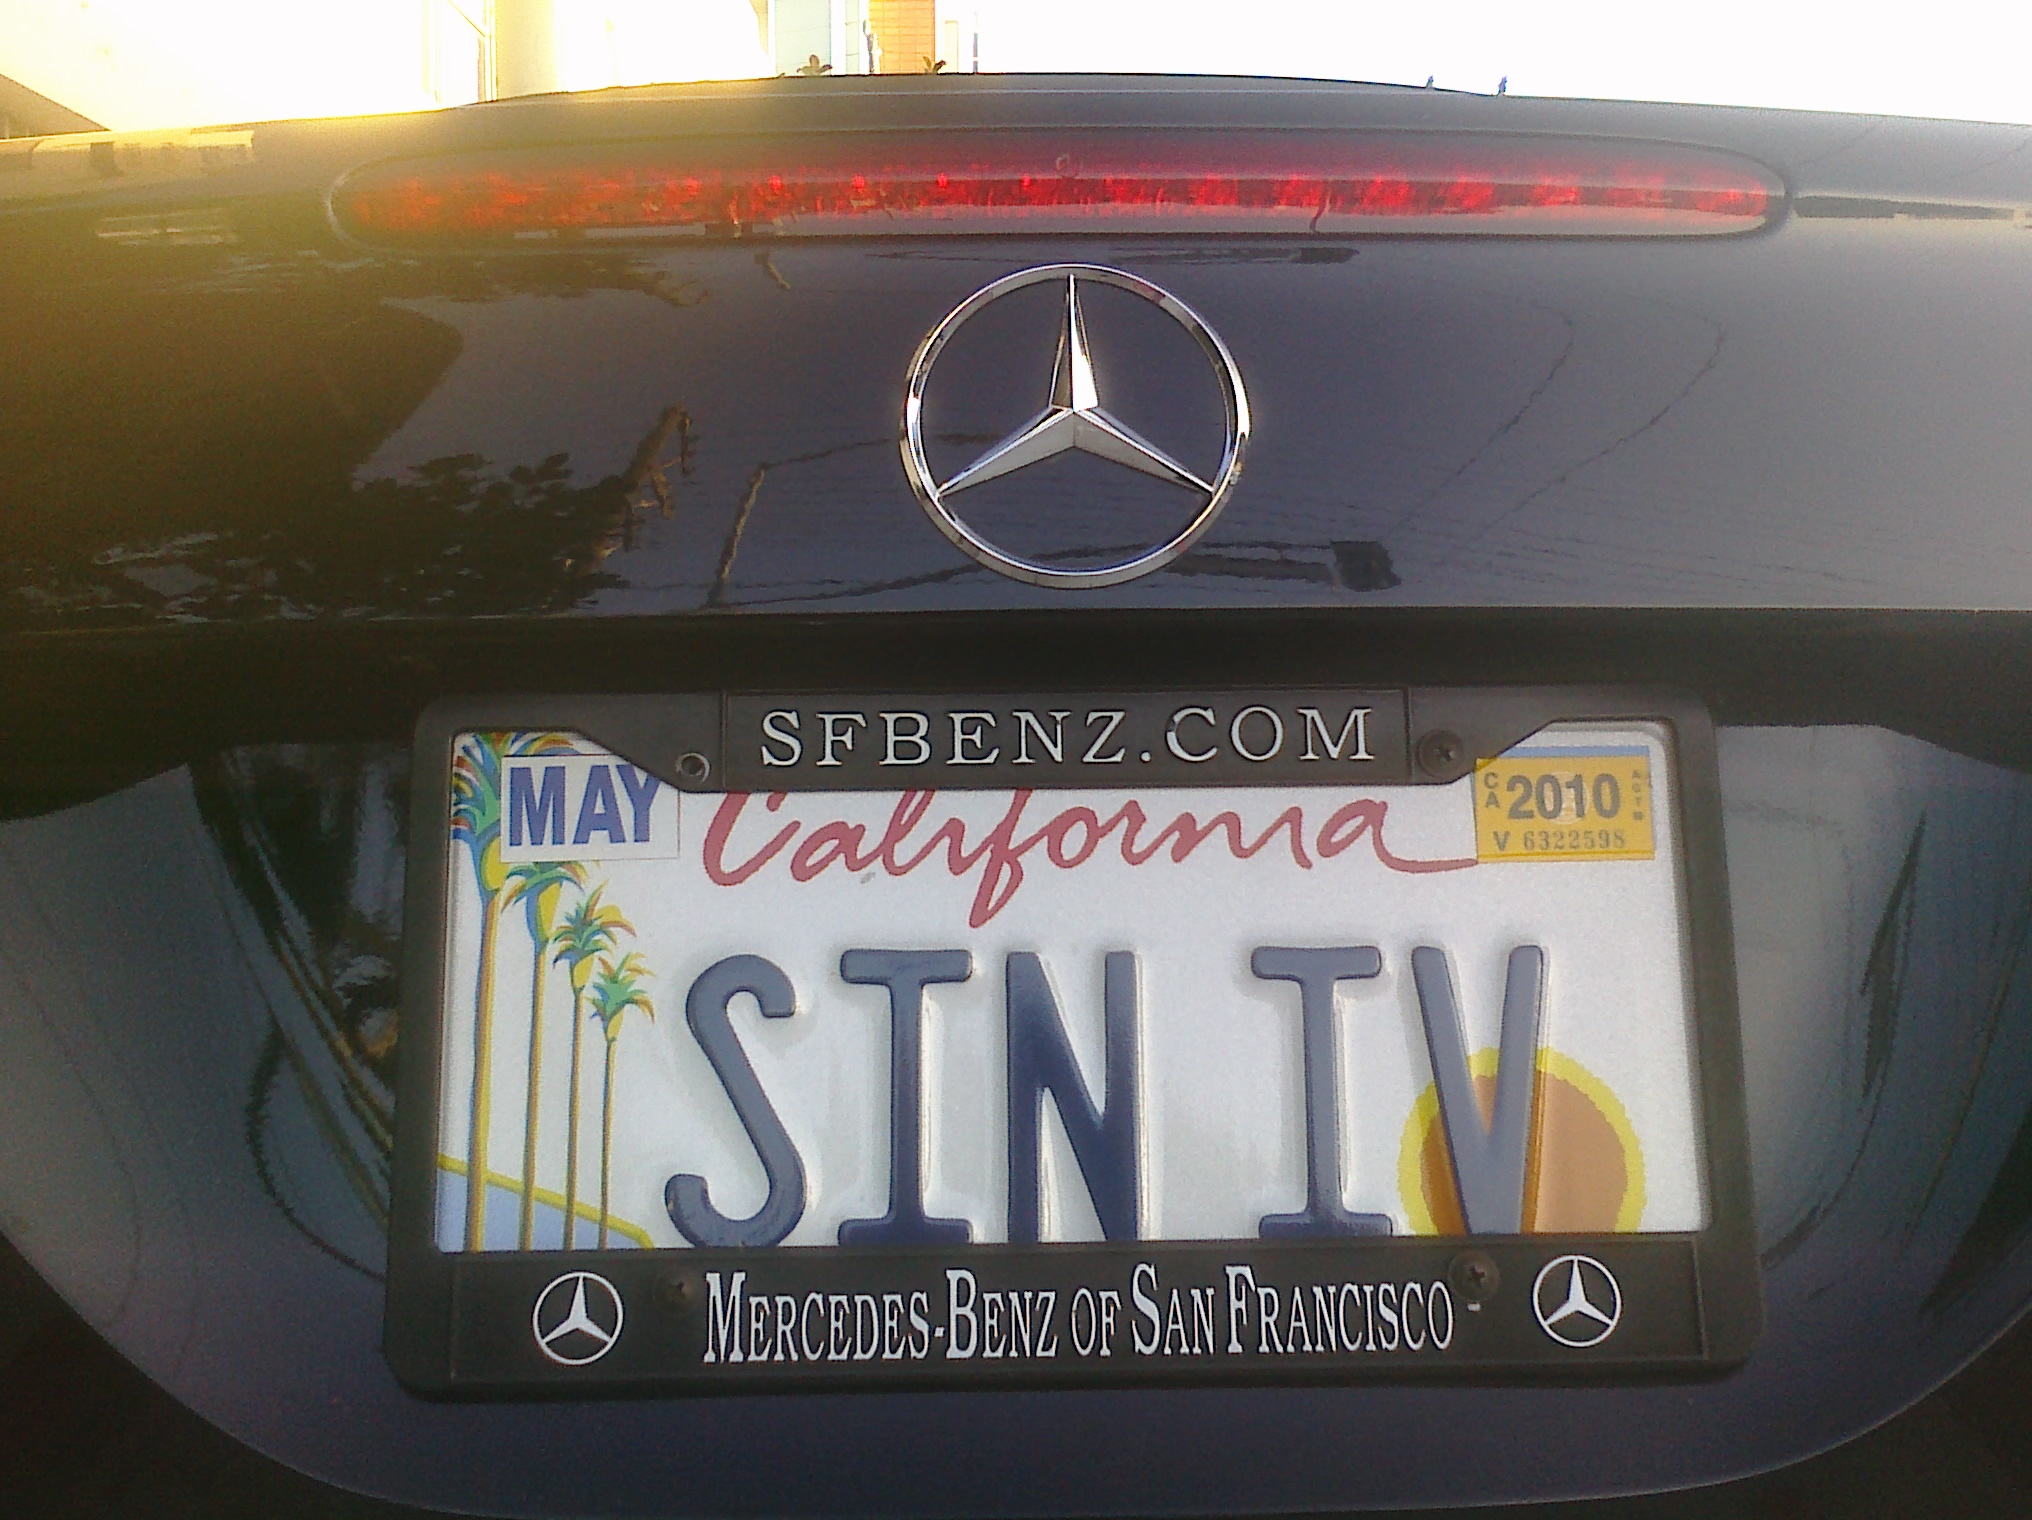 a black mercedes car with a license plate